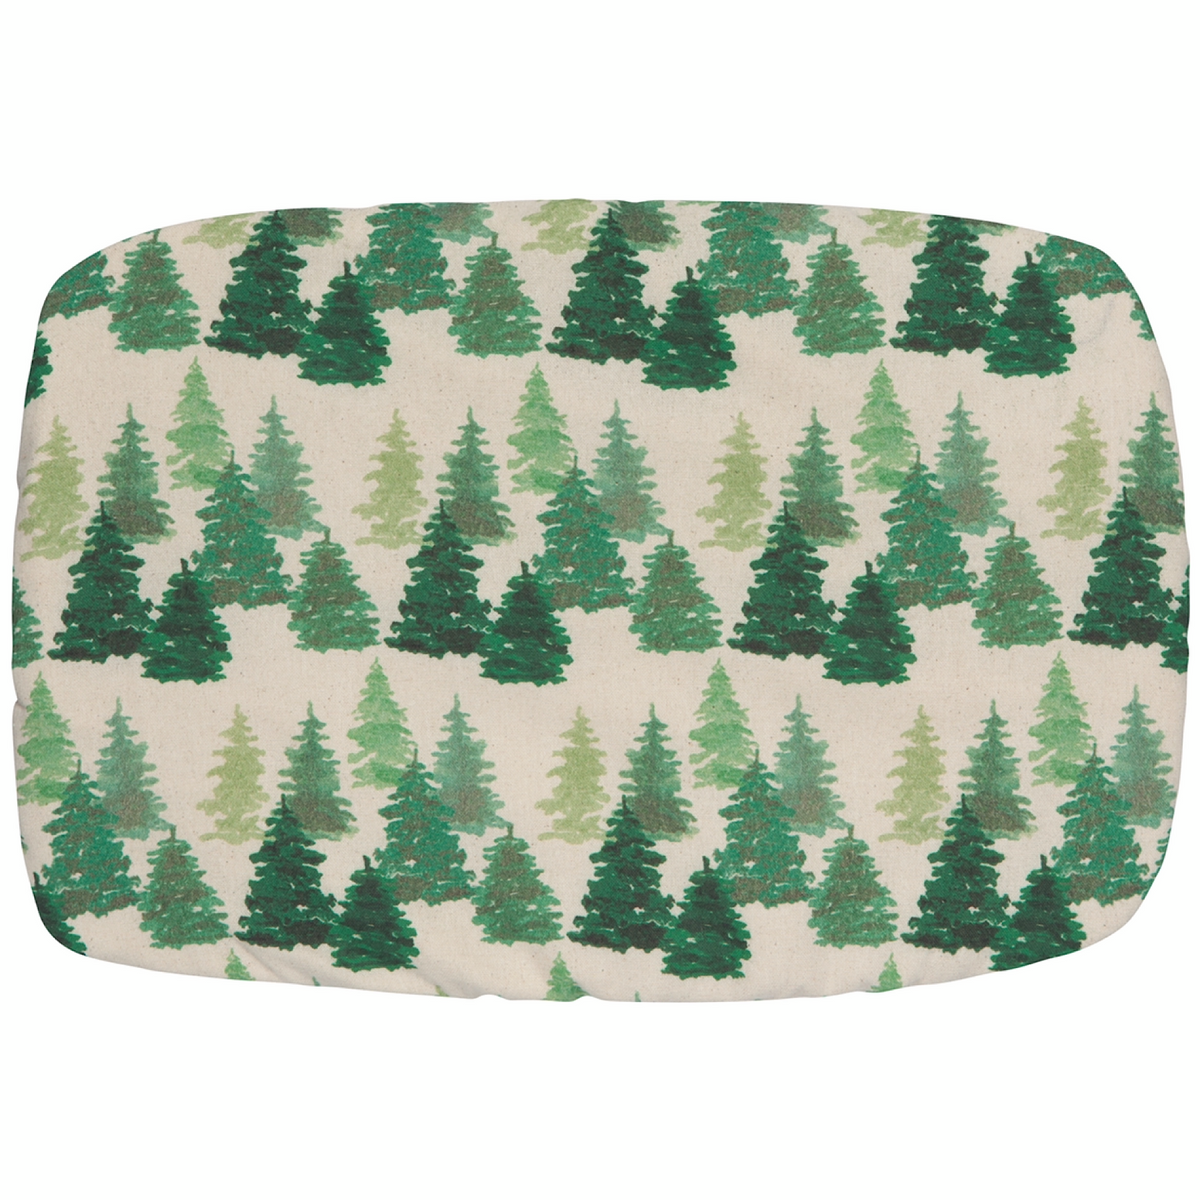 Woods Baking Dish Cover